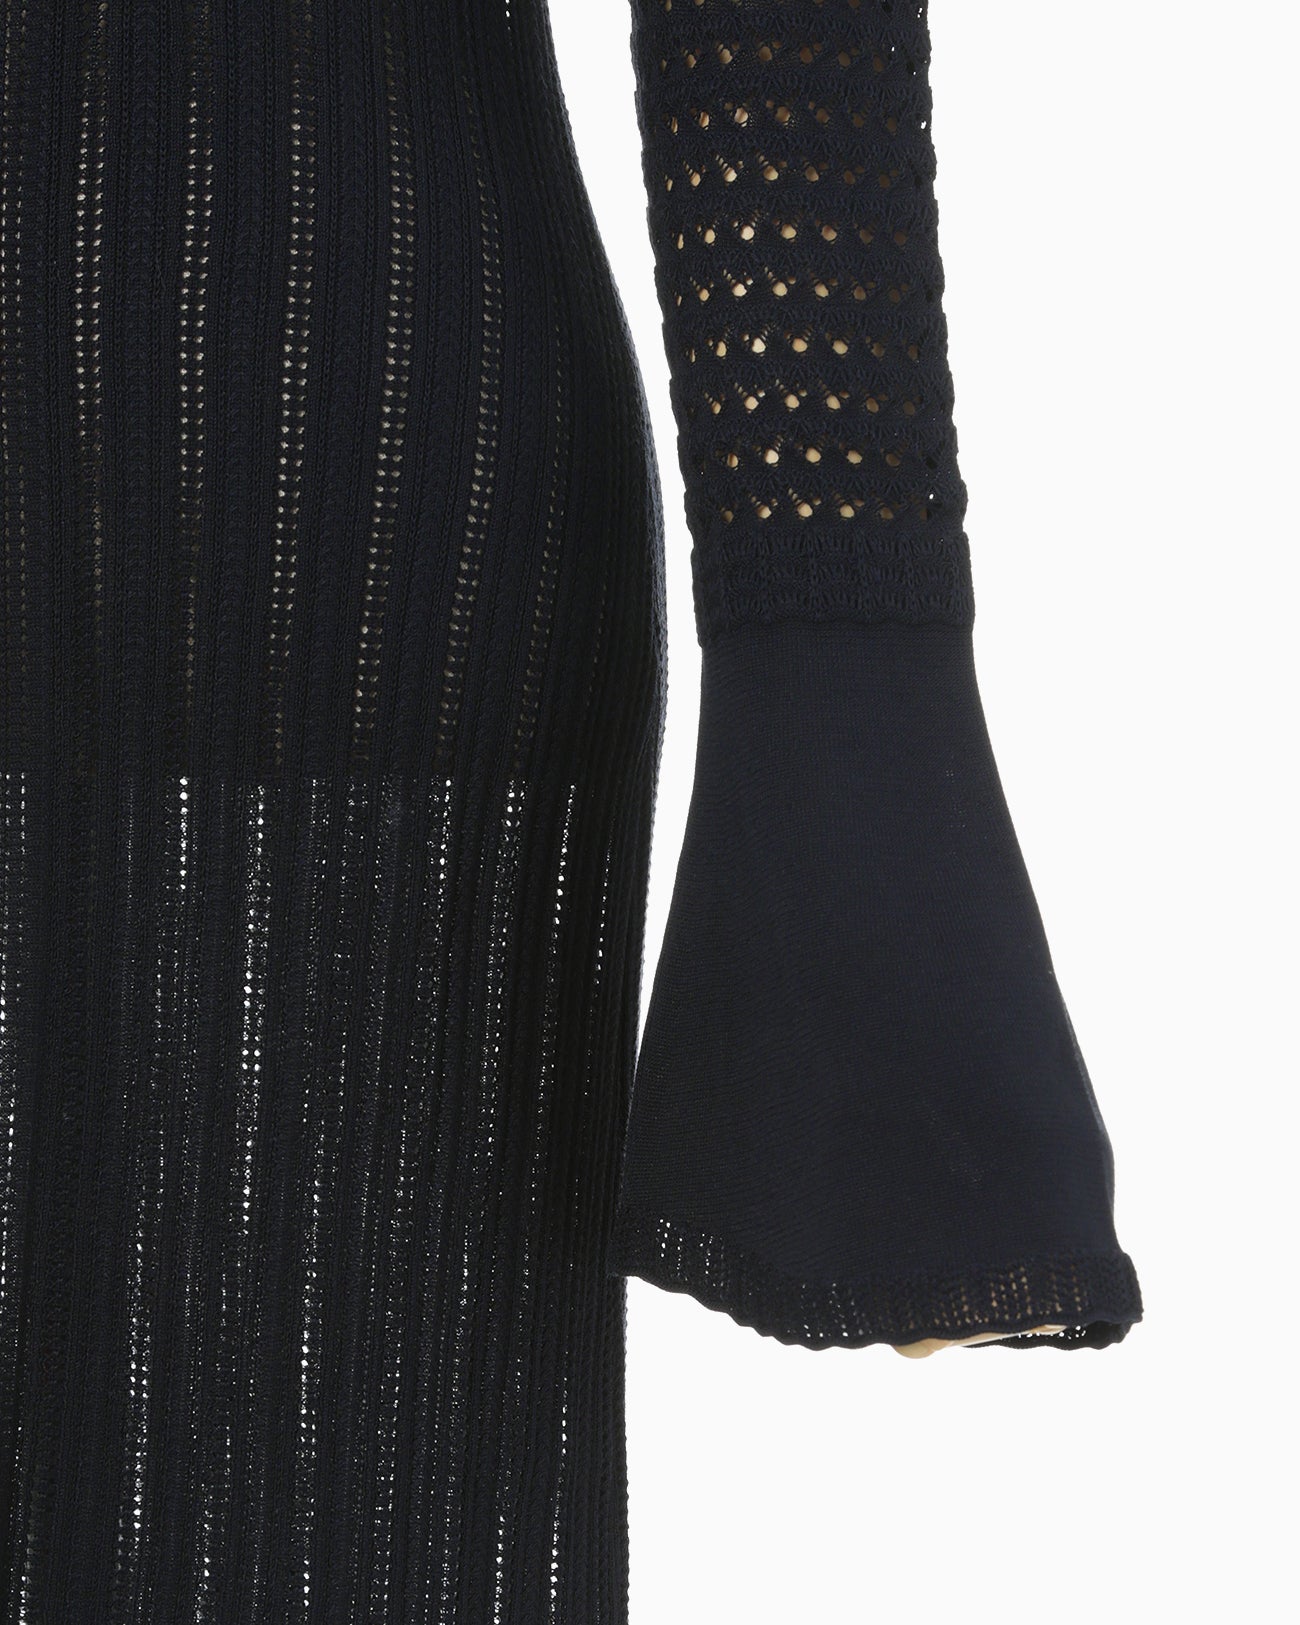 Lace Stripe Knitted Dress - navy